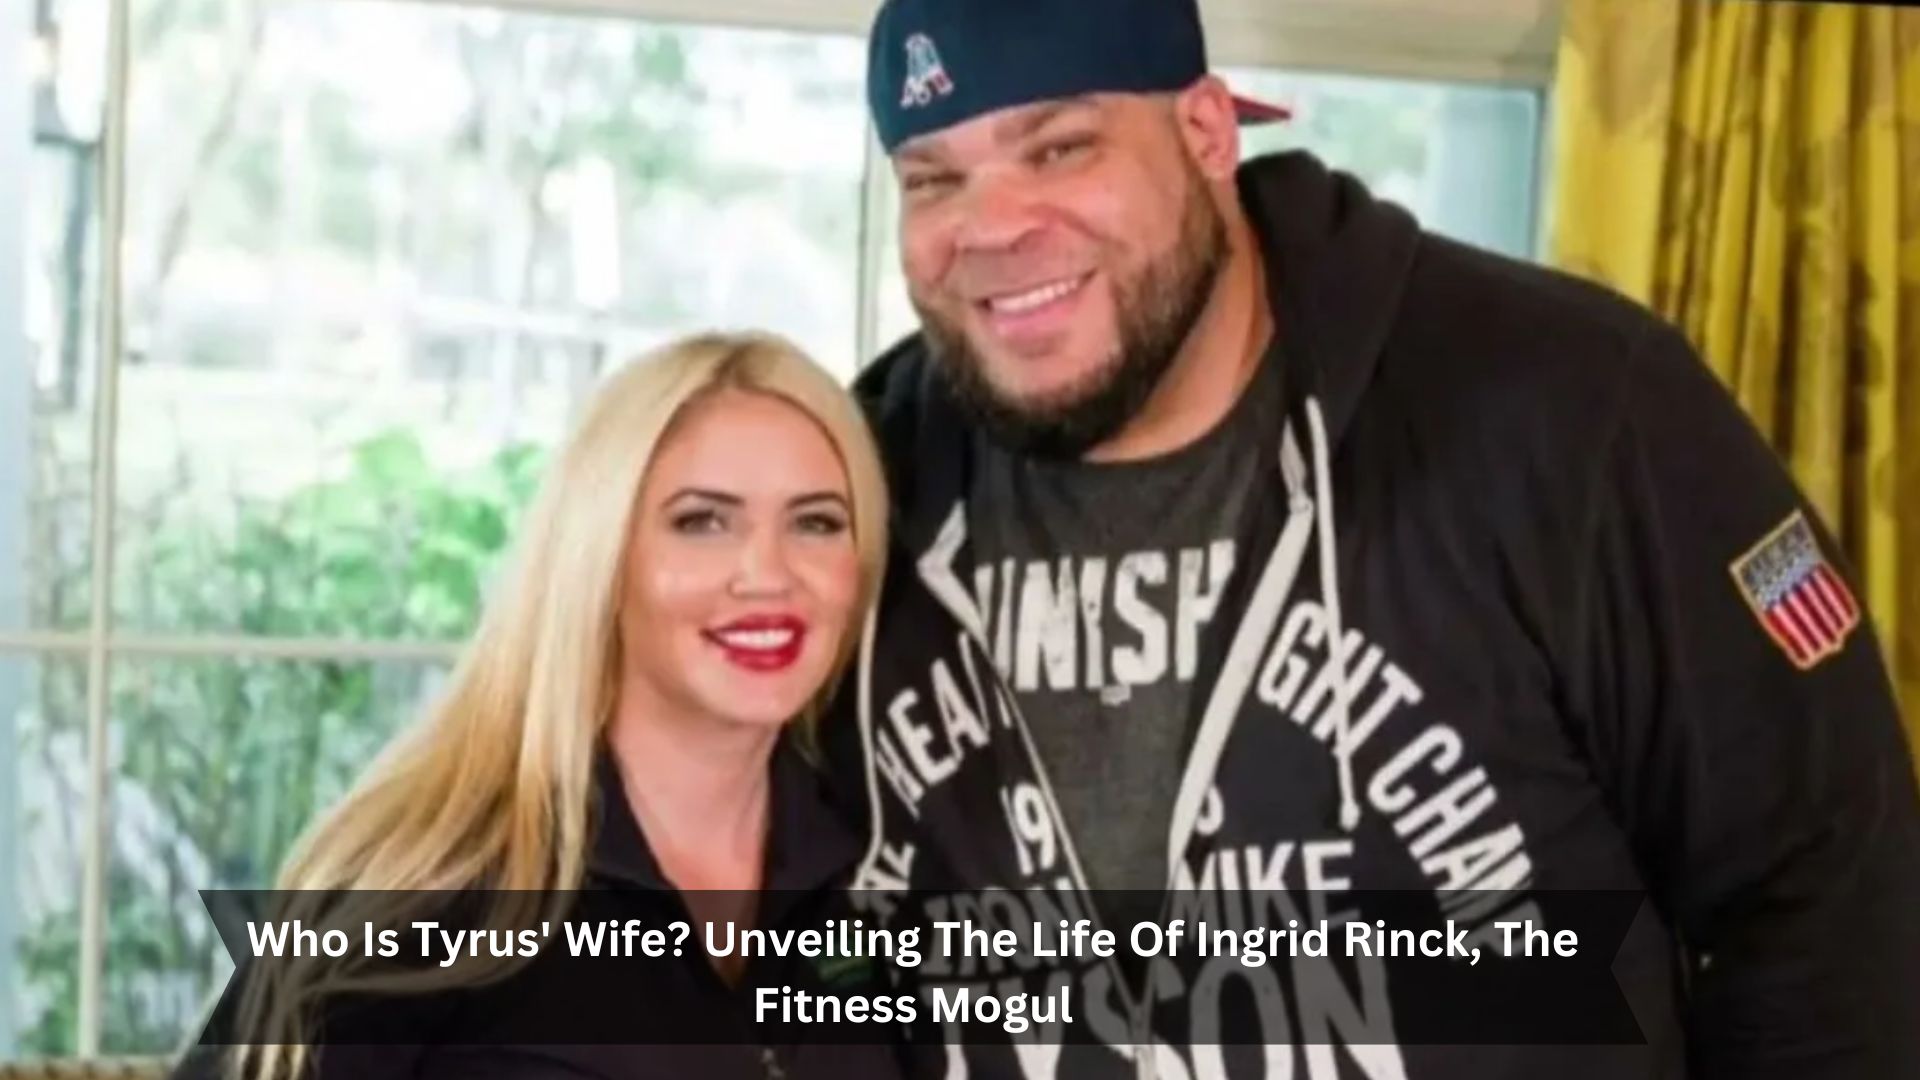 Who-Is-Tyrus-Wife-Unveiling-The-Life-Of-Ingrid-Rinck-The-Fitness-Mogul